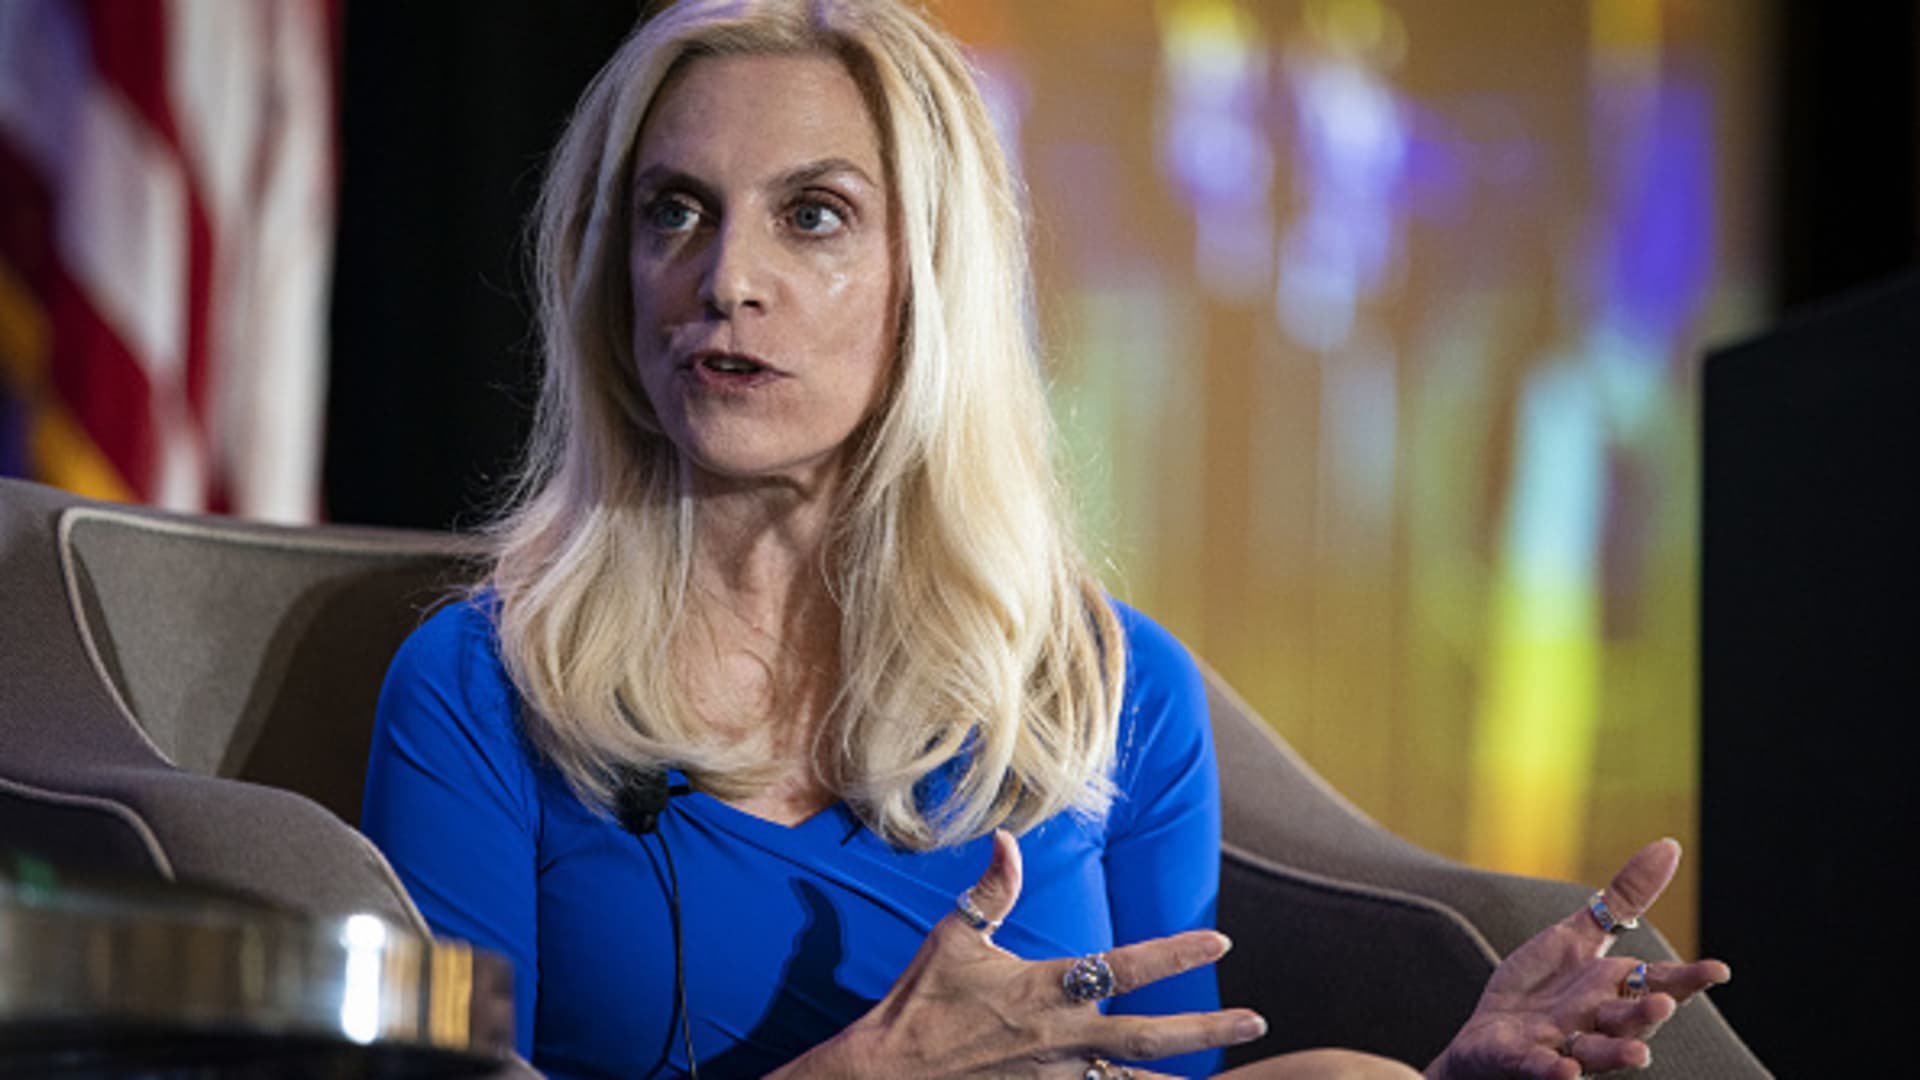 Feds Brainard says that crypto needs regulation before it gets too big